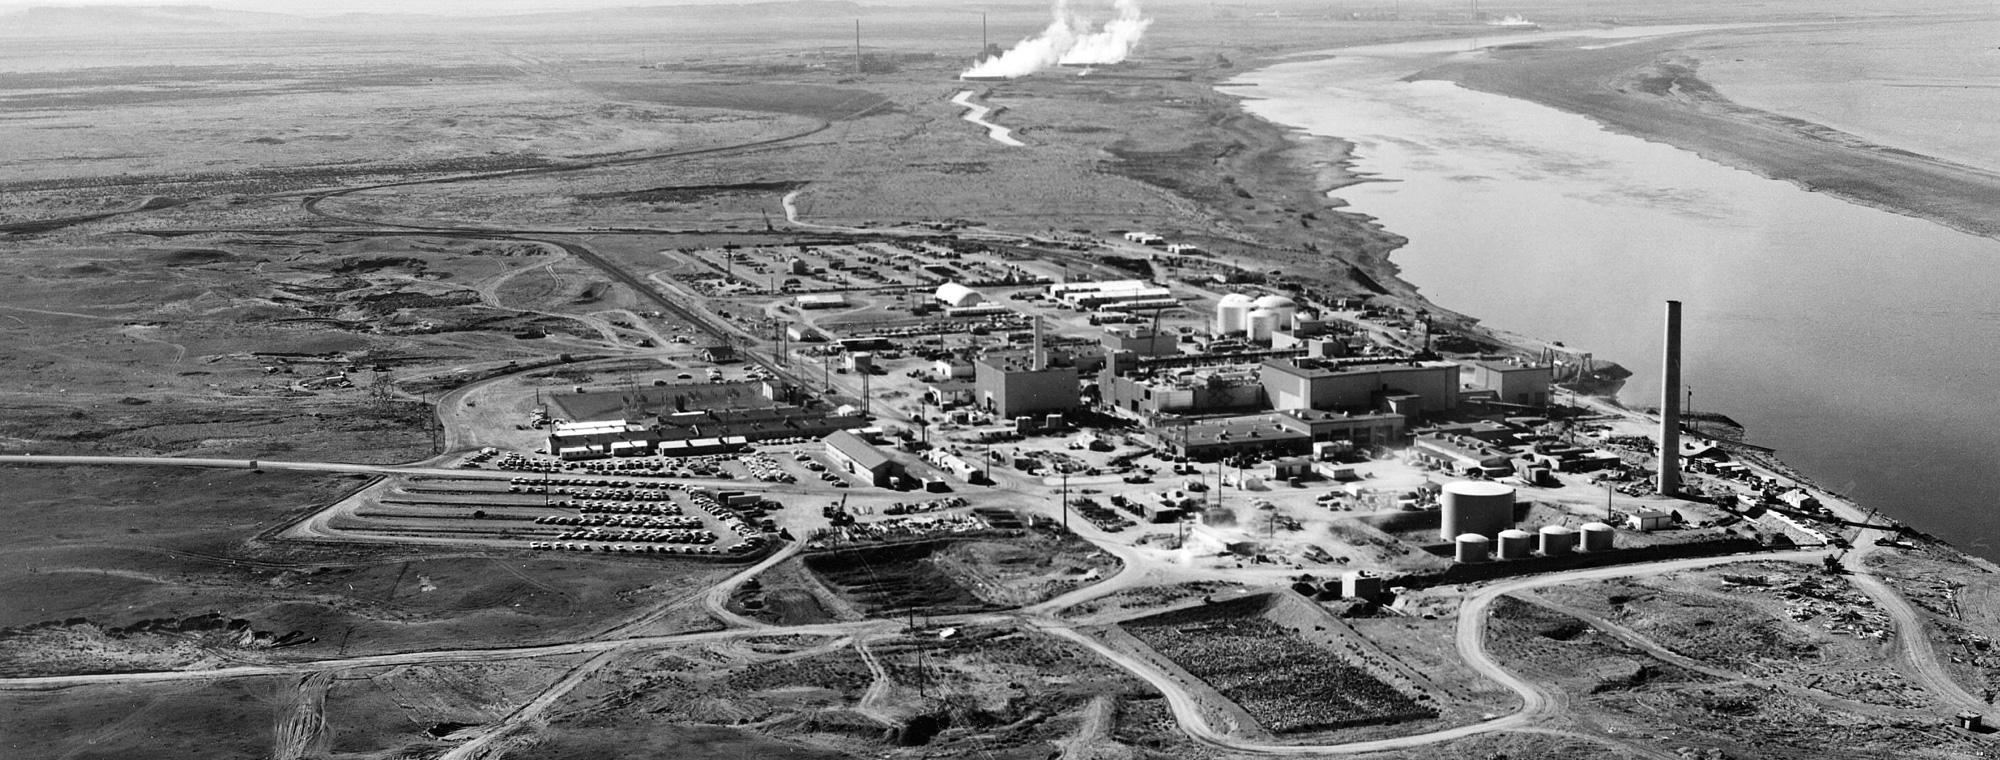 Photo of the Hanford Nuclear Production Complex